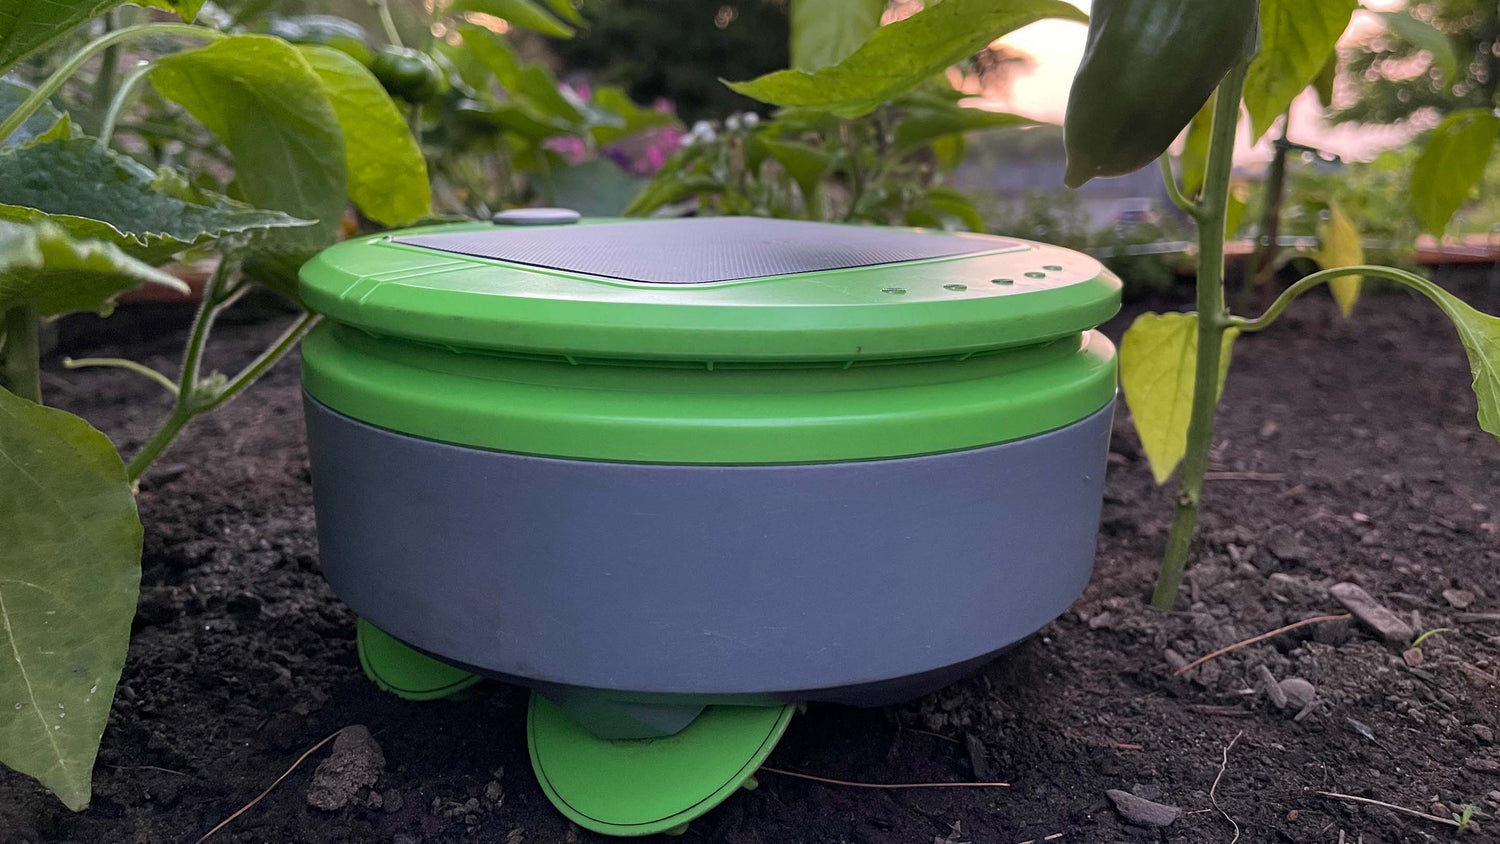 Tertill Weeding Robot in weed-free raised bed garden near a pepper plant early in the morning. Tertill is a solar powered weeding robot that prevents weeds in your vegetable garden. Chemical free, easy to use, effective weed control.